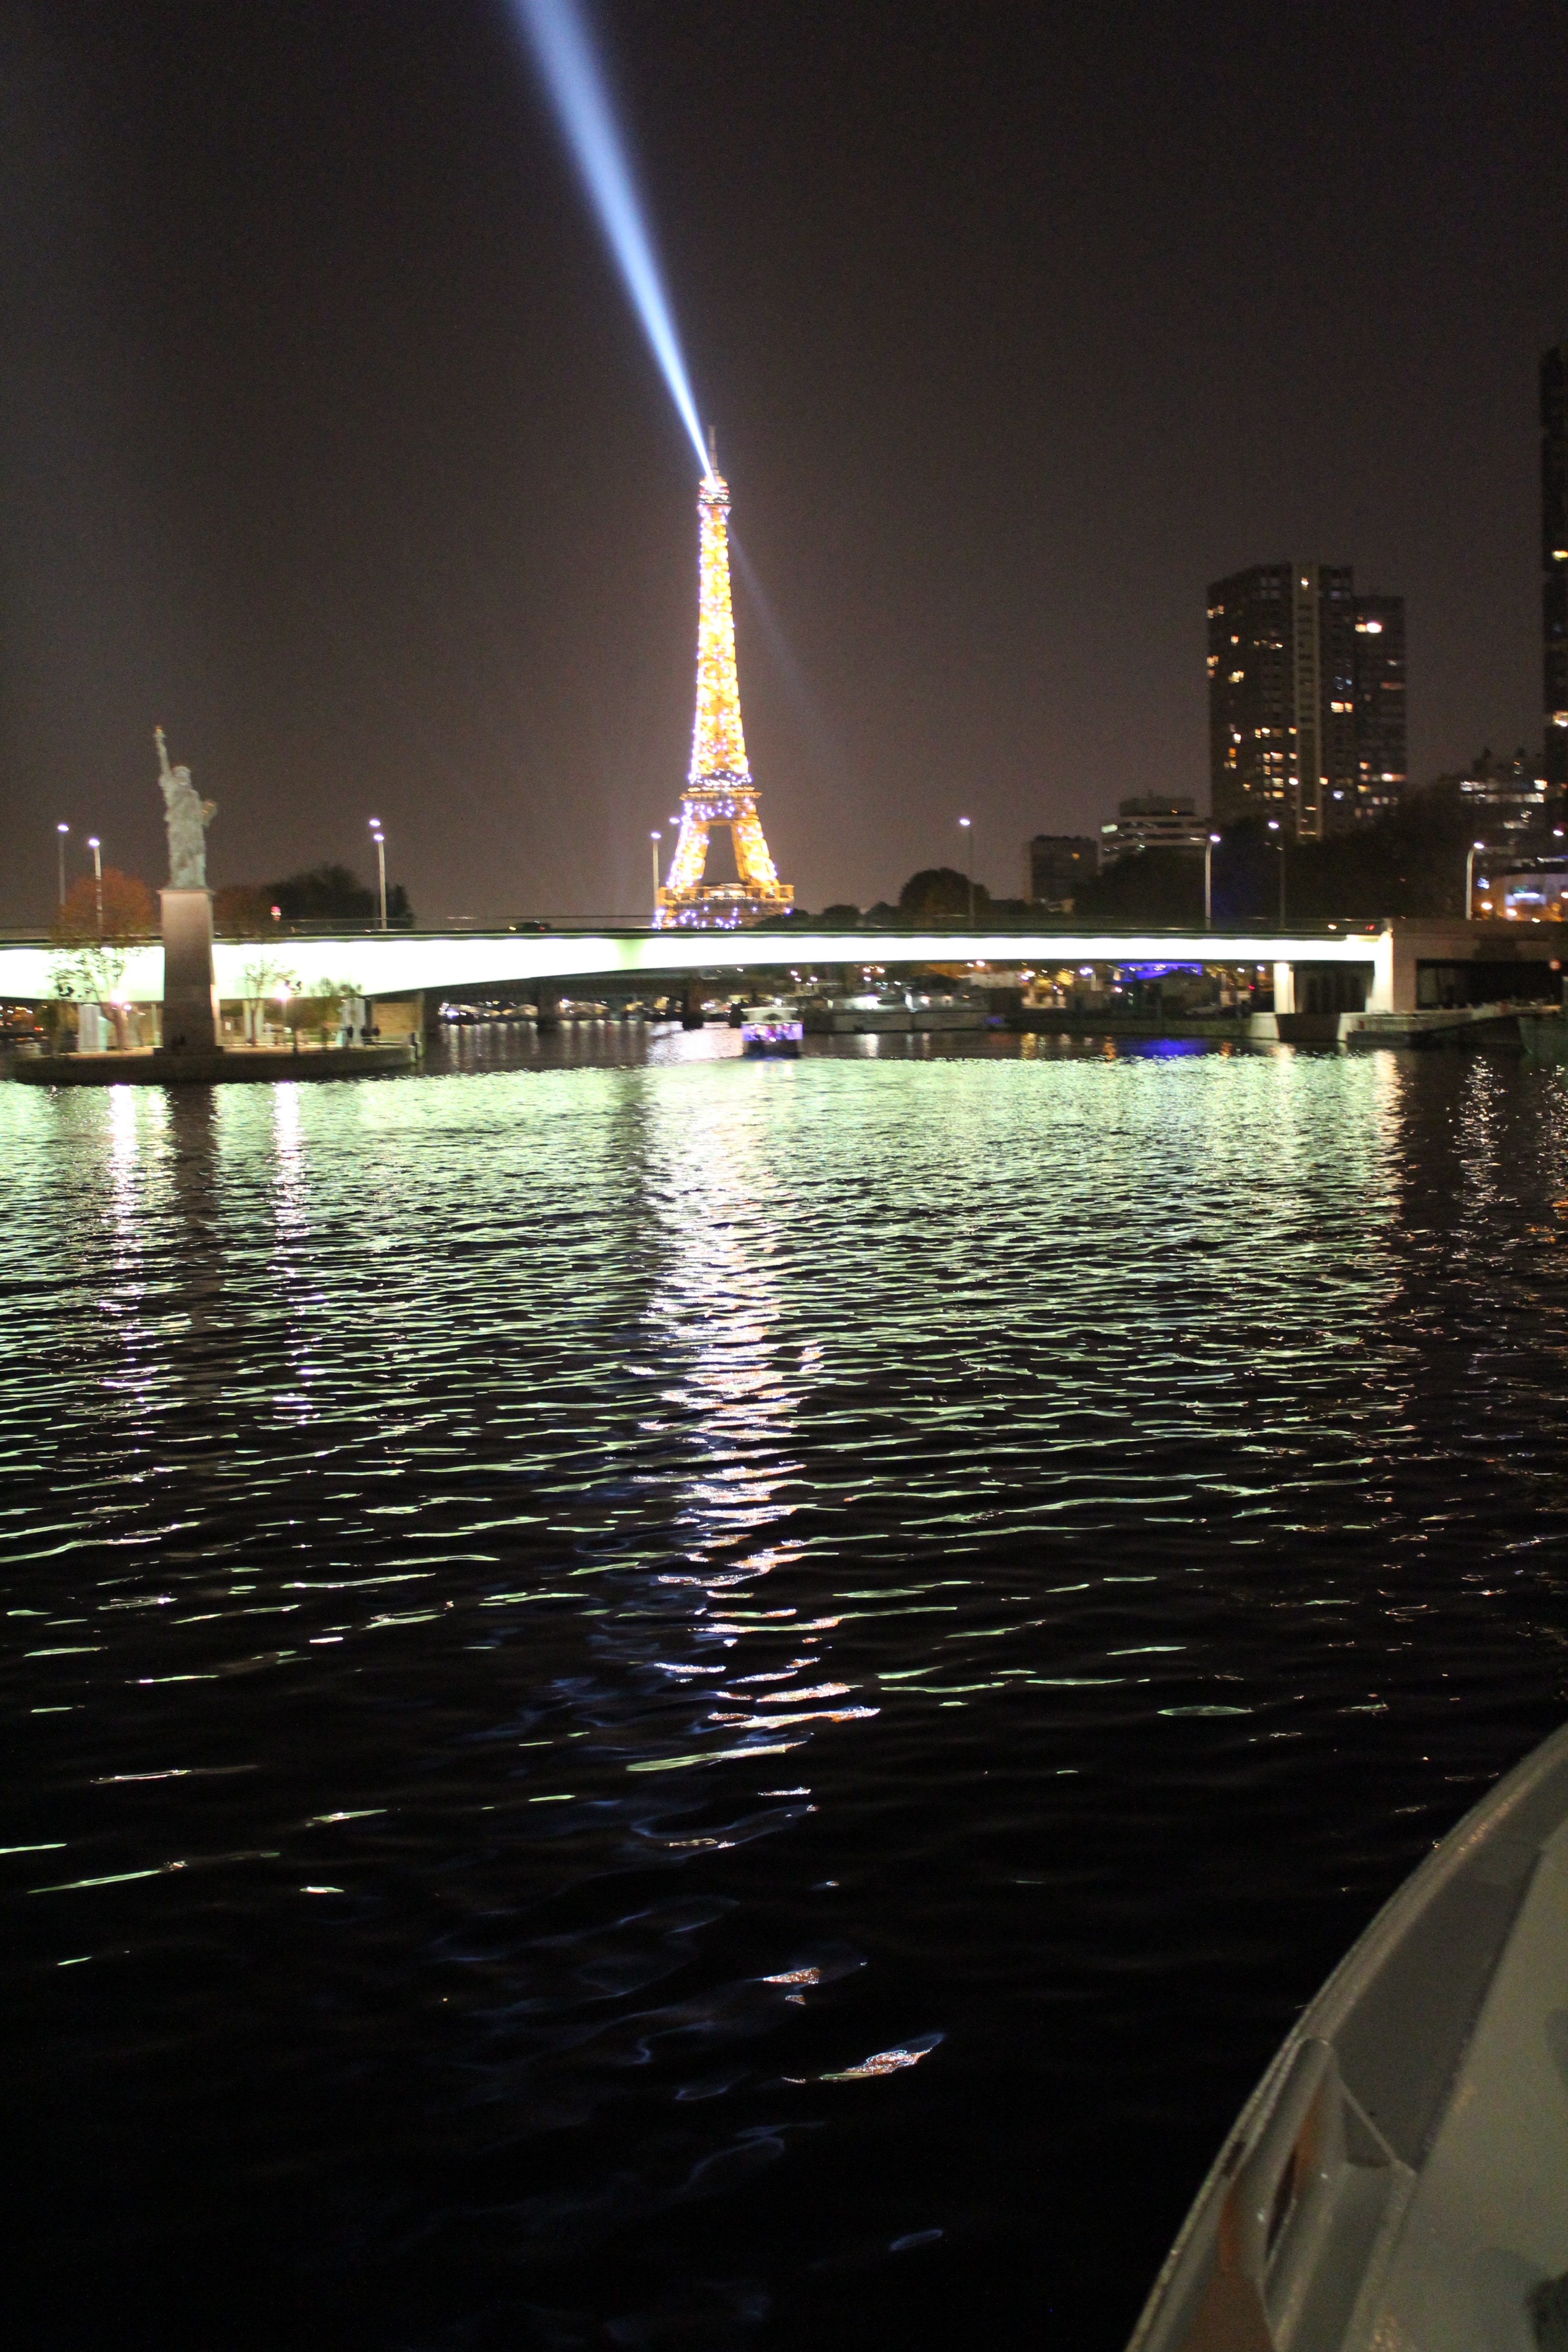  My Paris Trip was "S Marvelous." Ama Waterways Embarkation on Seine River Cruise, in view of the four Staute of Liberty's in Paris with the iconic EIffel Tower illuminated.